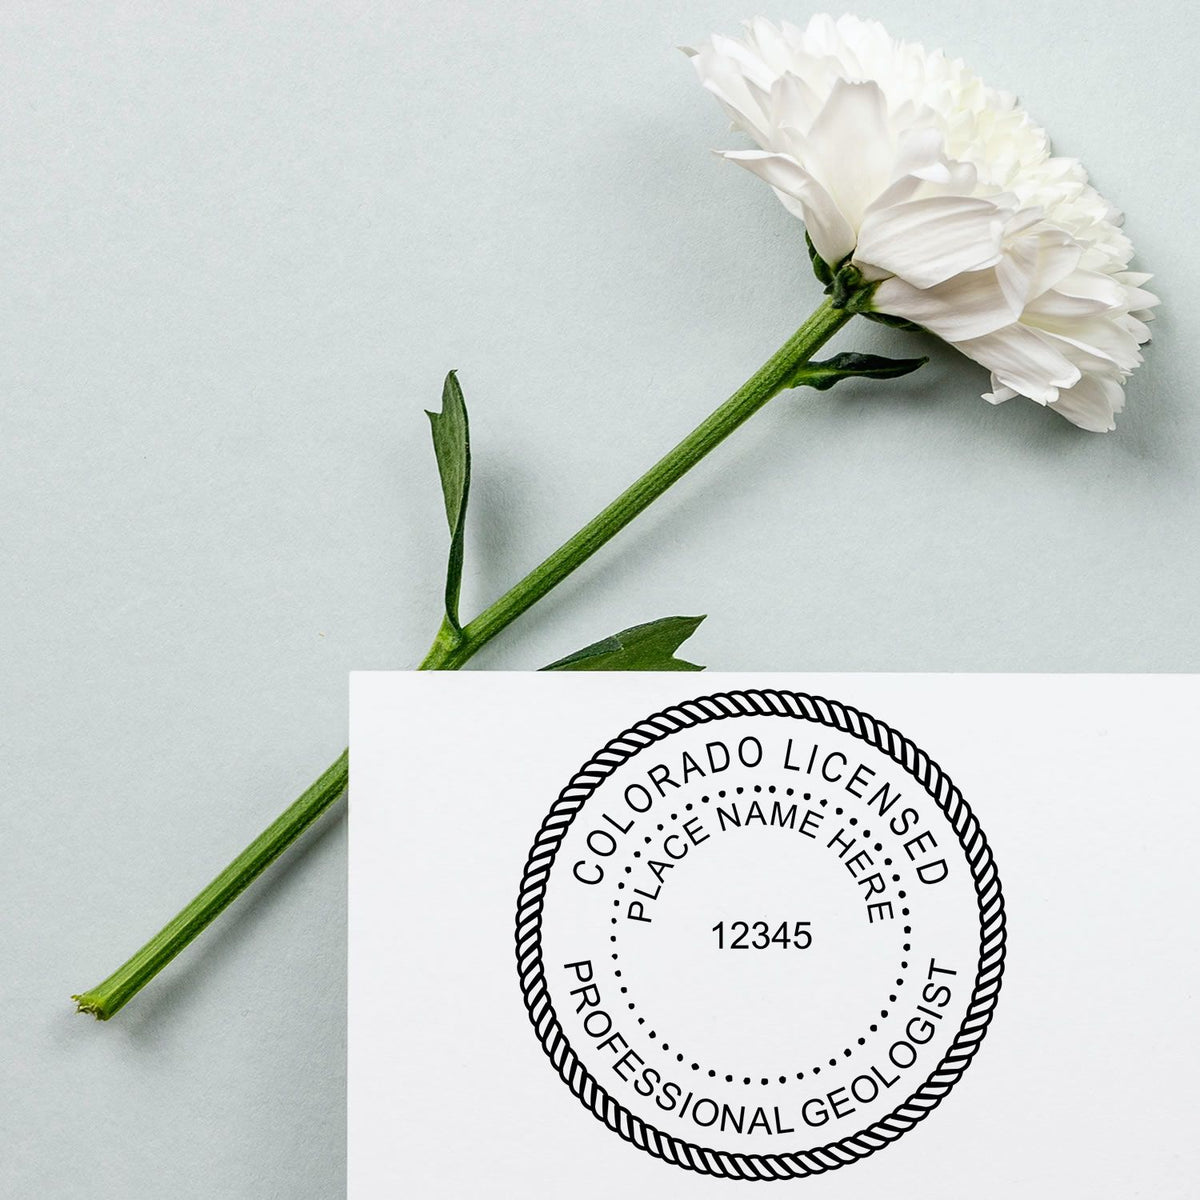 A stamped imprint of the Digital Colorado Geologist Stamp, Electronic Seal for Colorado Geologist in this stylish lifestyle photo, setting the tone for a unique and personalized product.